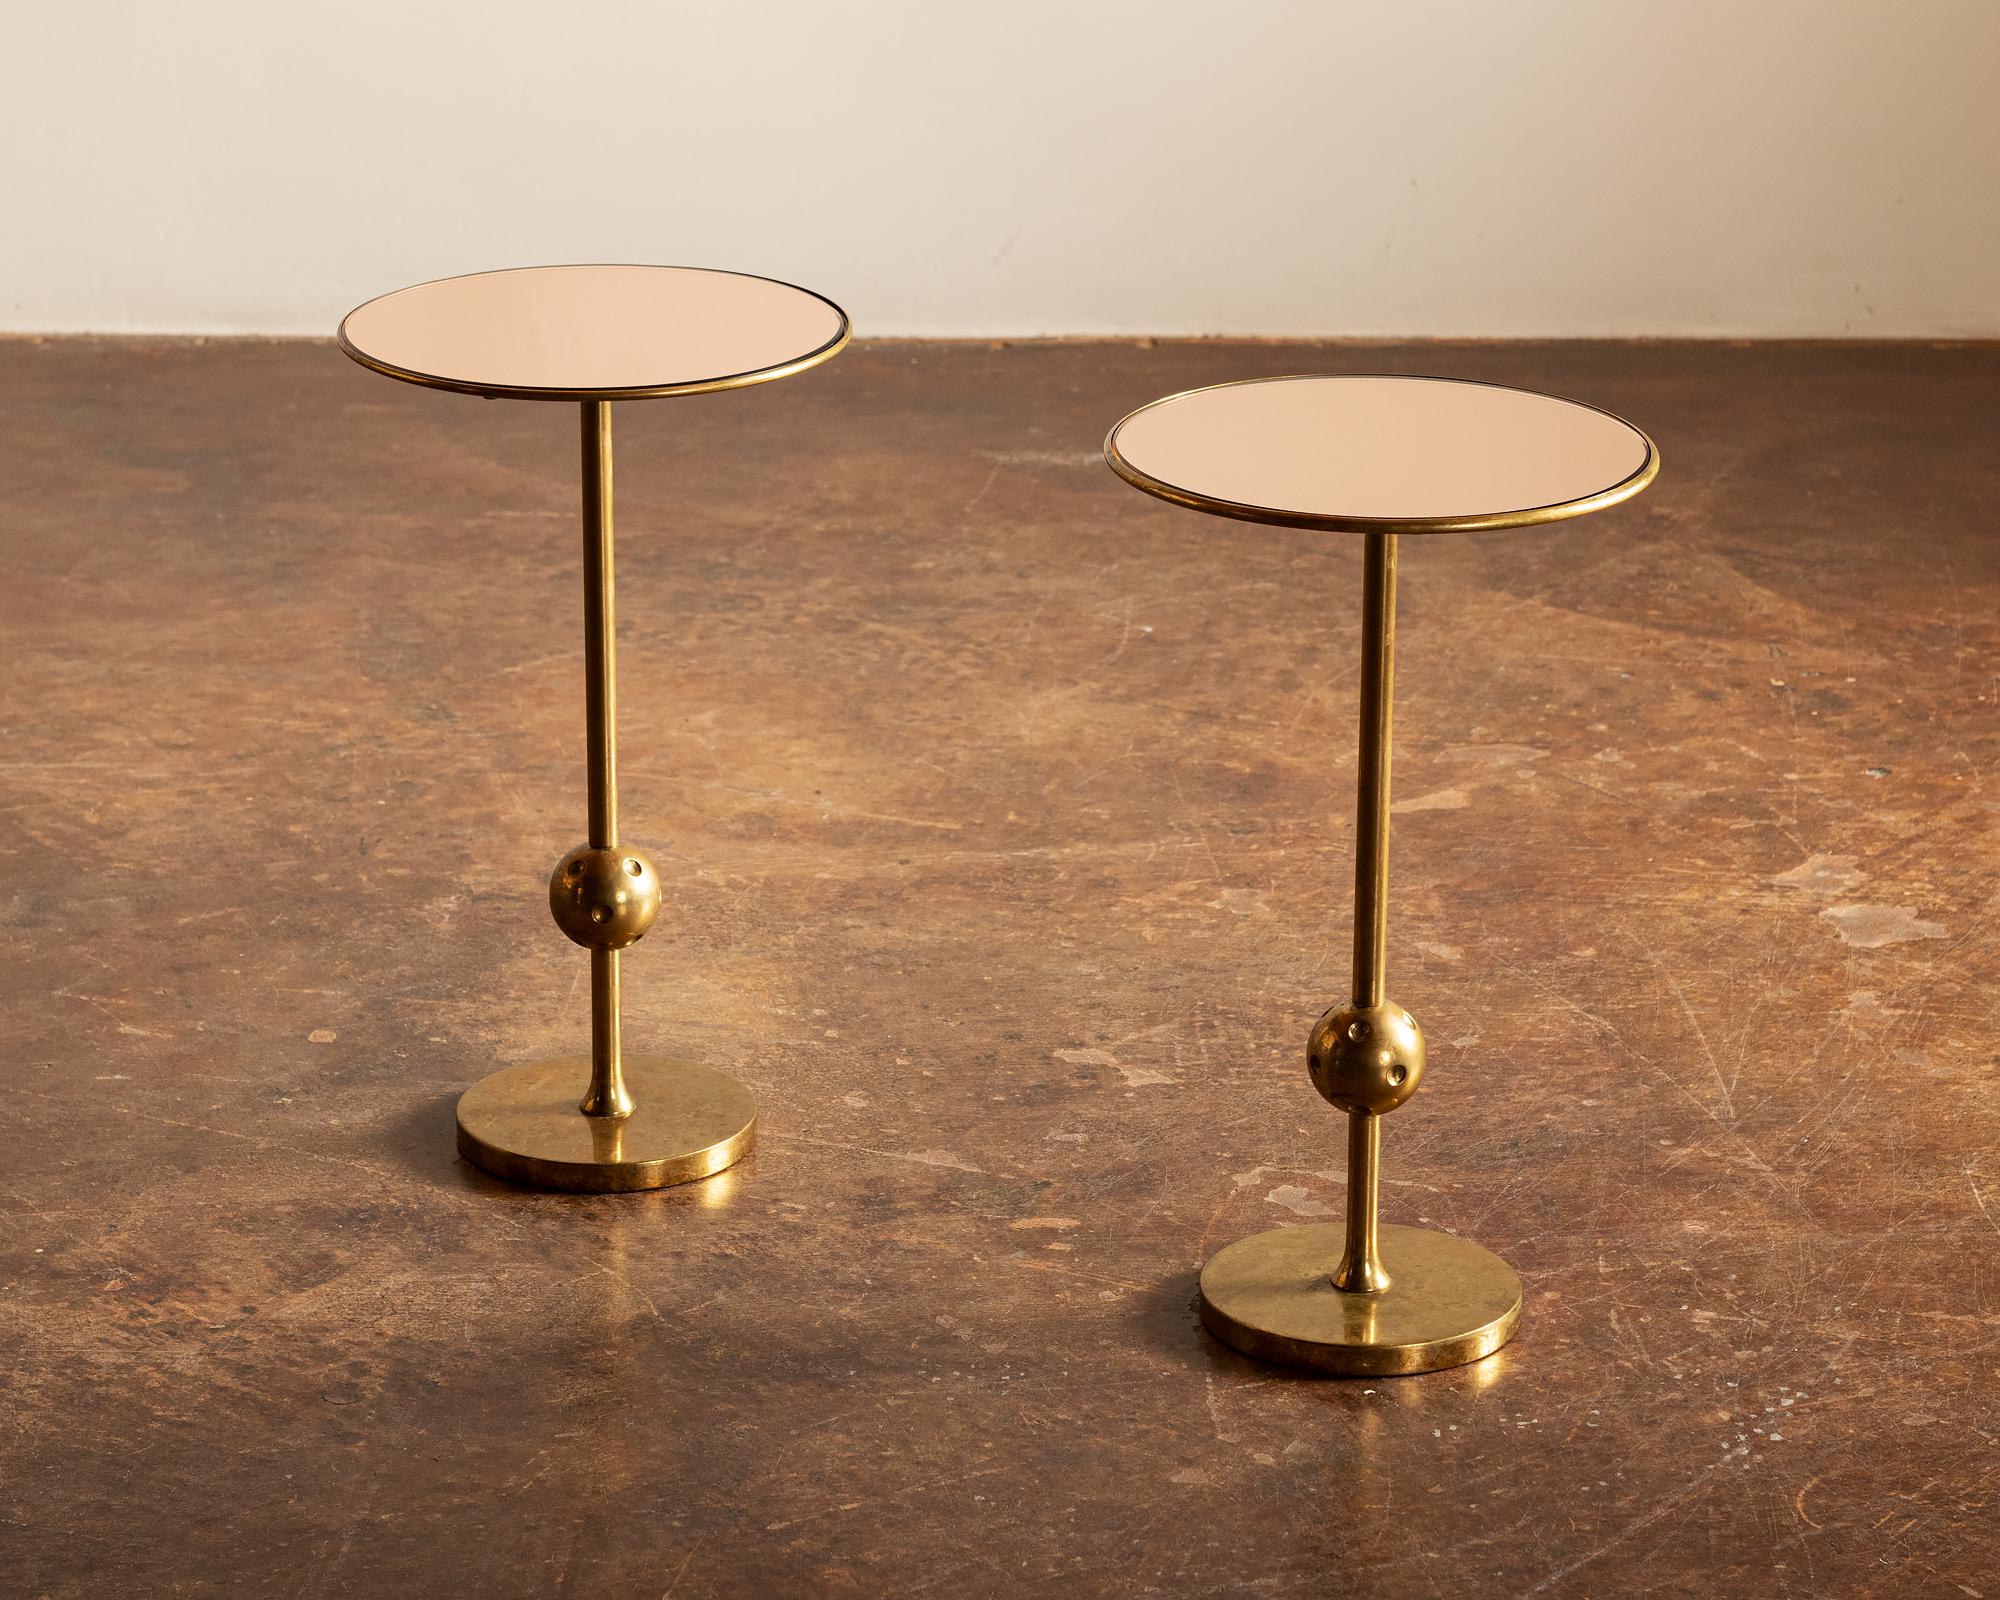 Mid-Century Modern Rare Pair of Side Tables by Osvaldo Borsani in Brass and Rose-Tinted Glass 1940s